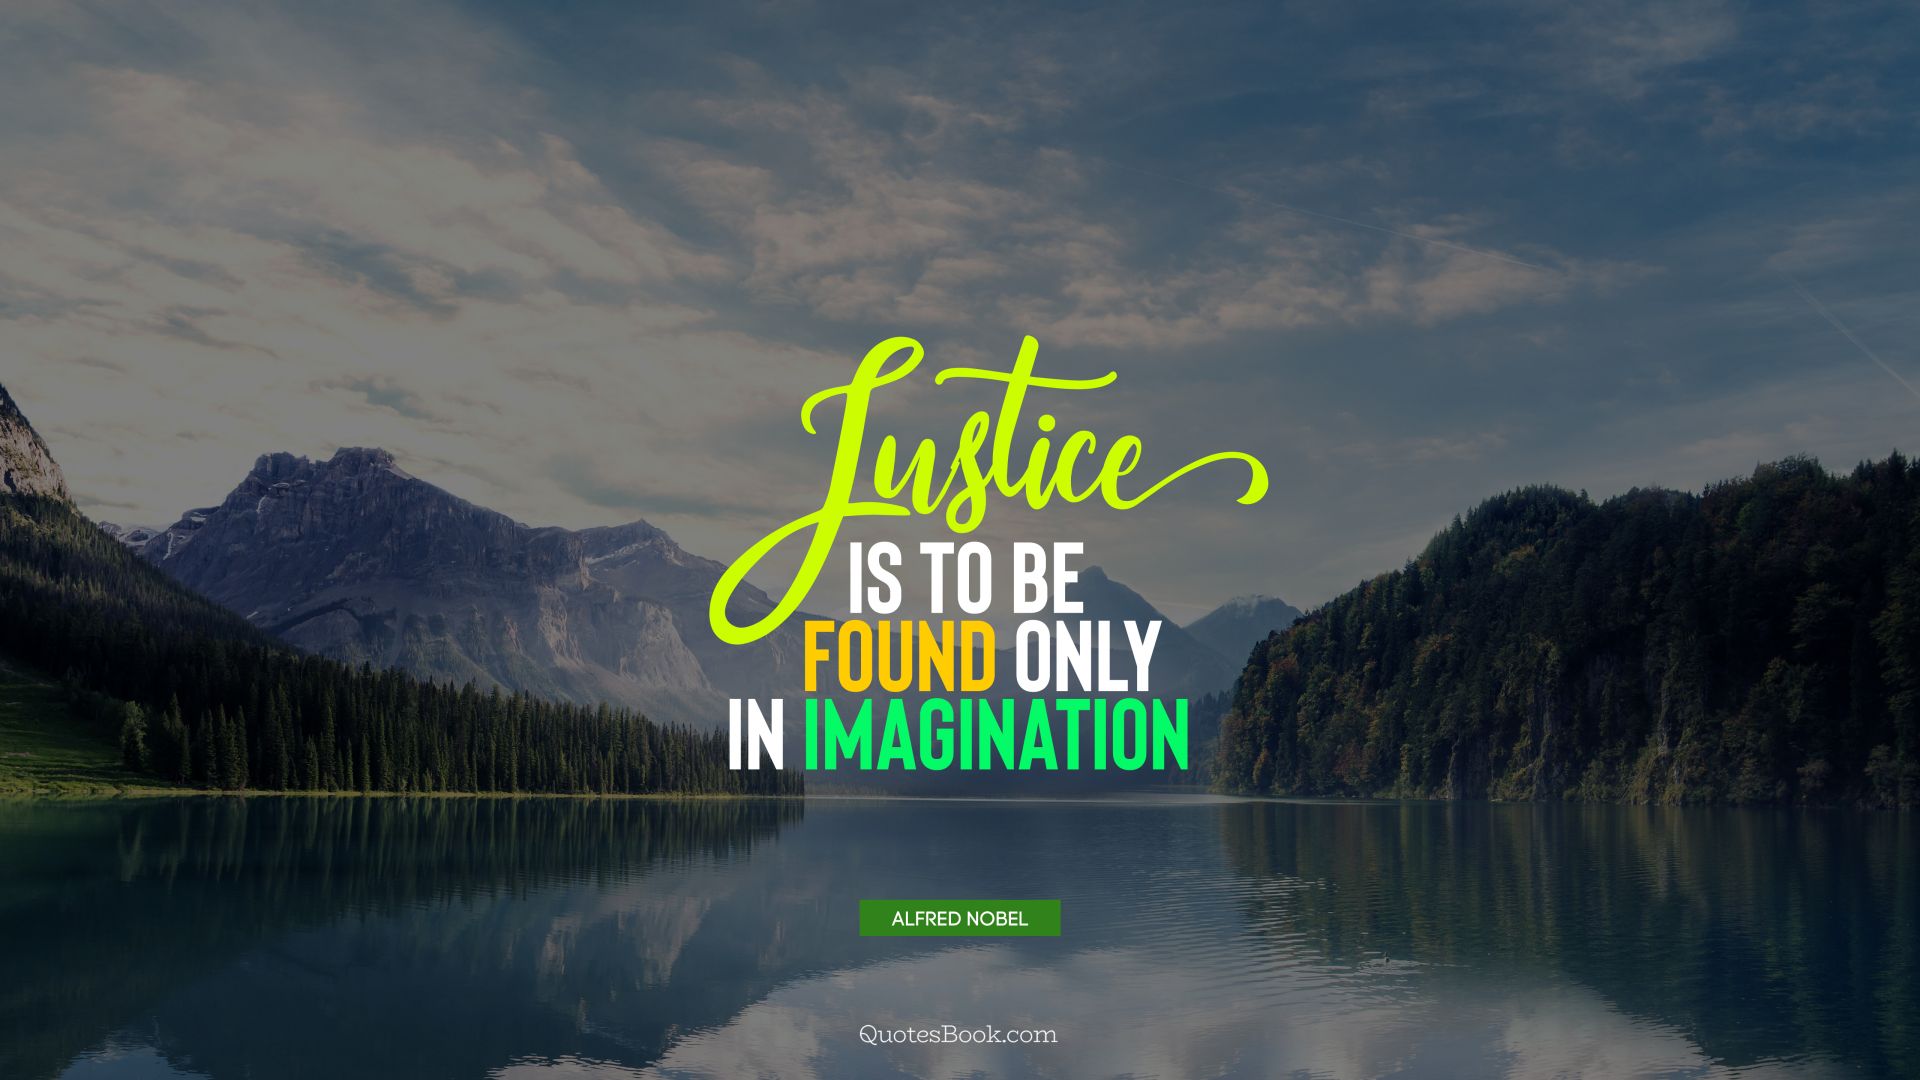 Justice is to be found only in imagination. - Quote by Alfred Nobel